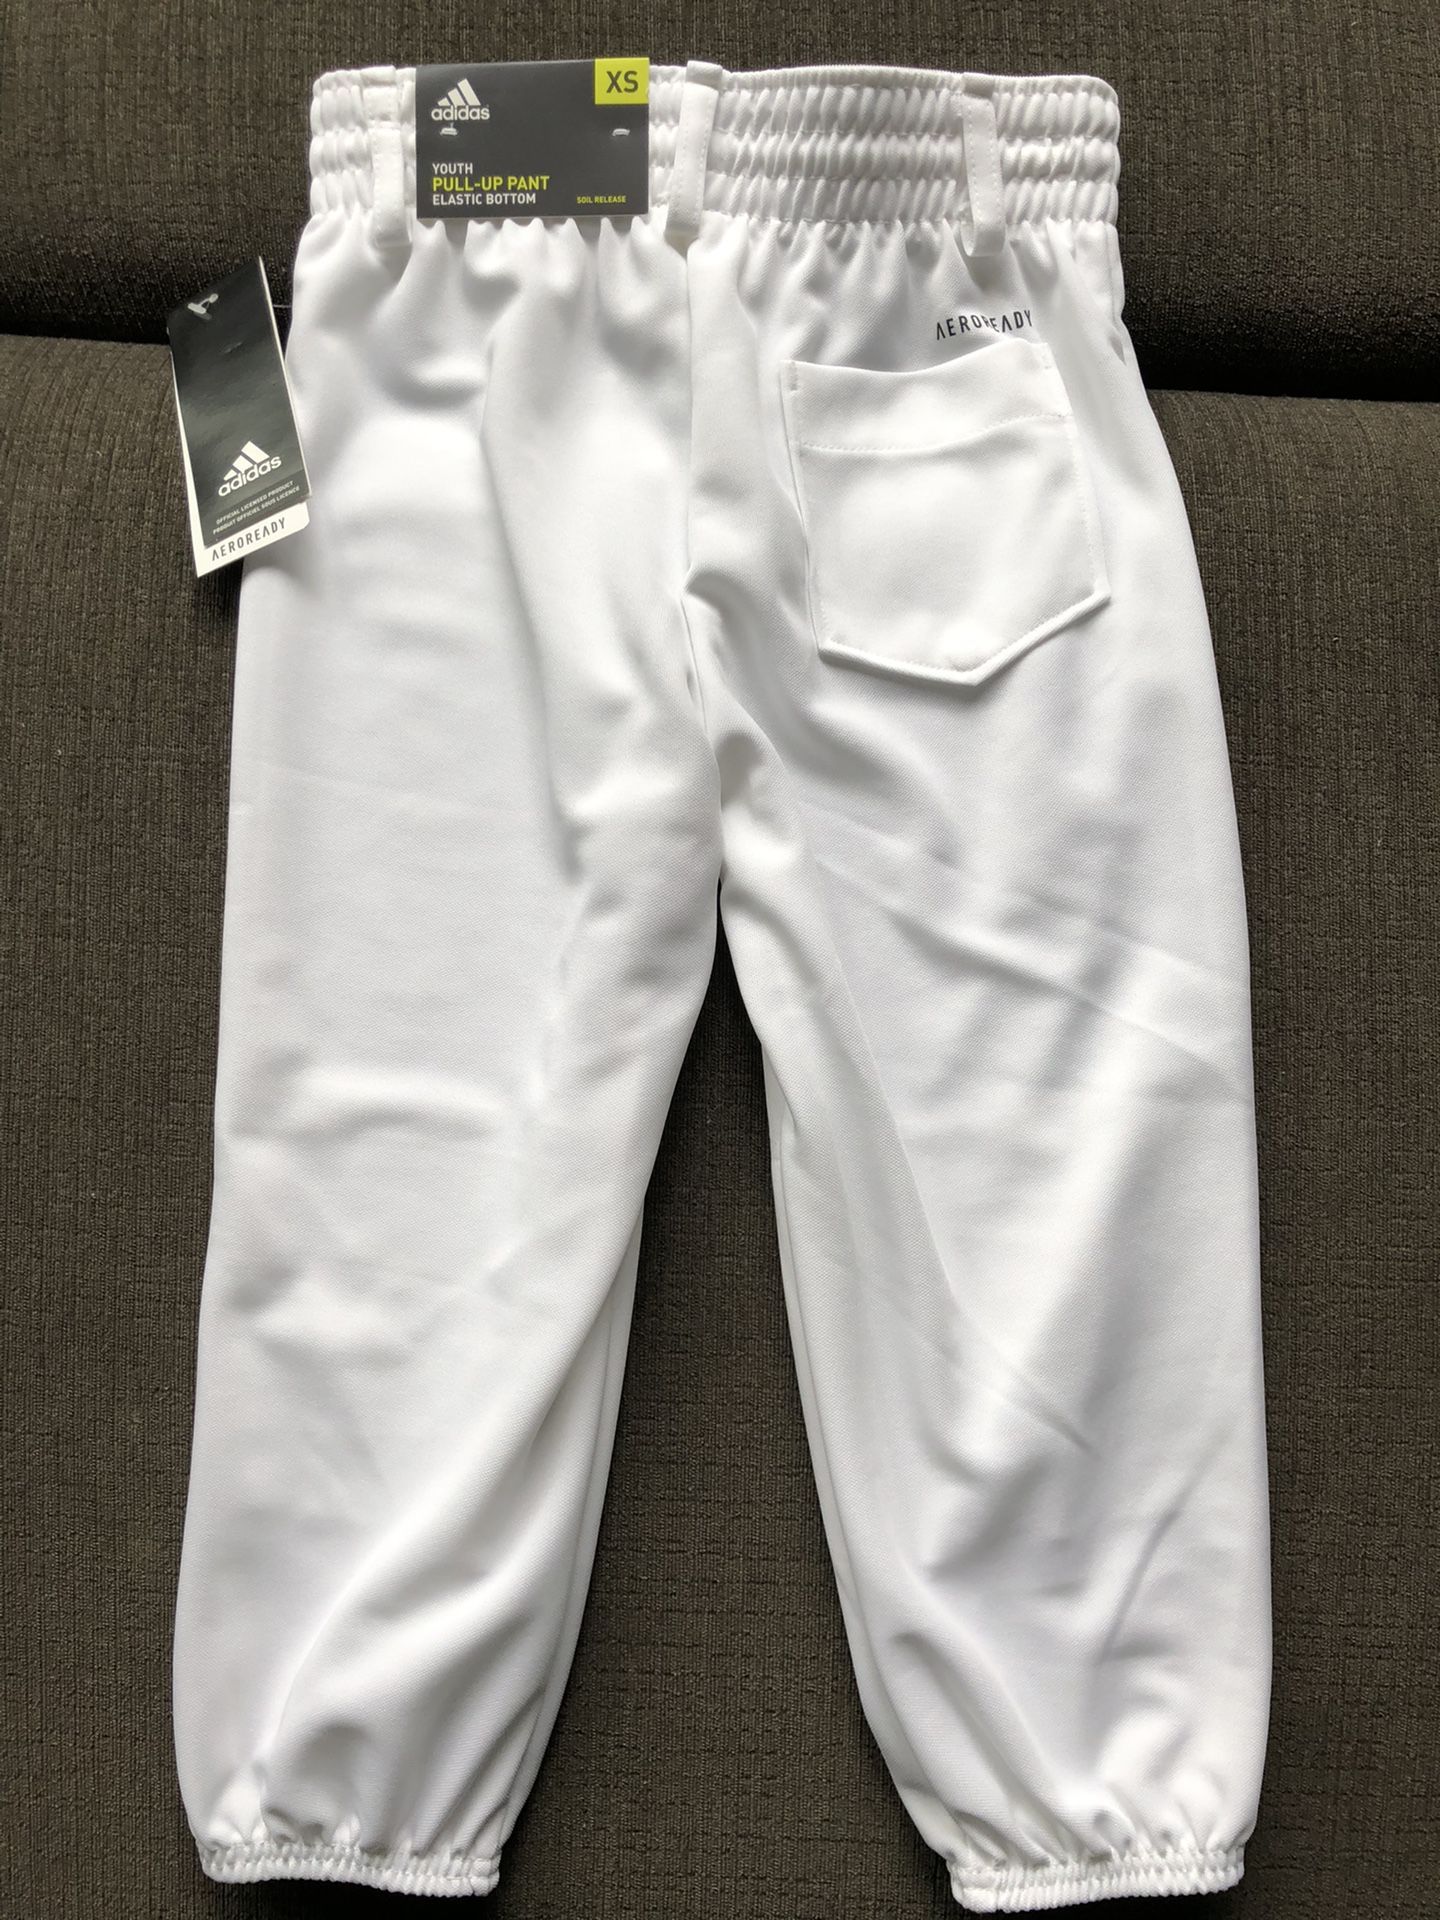 NEW / NWT Youth Pull-up Pant Elastic Bottom XS